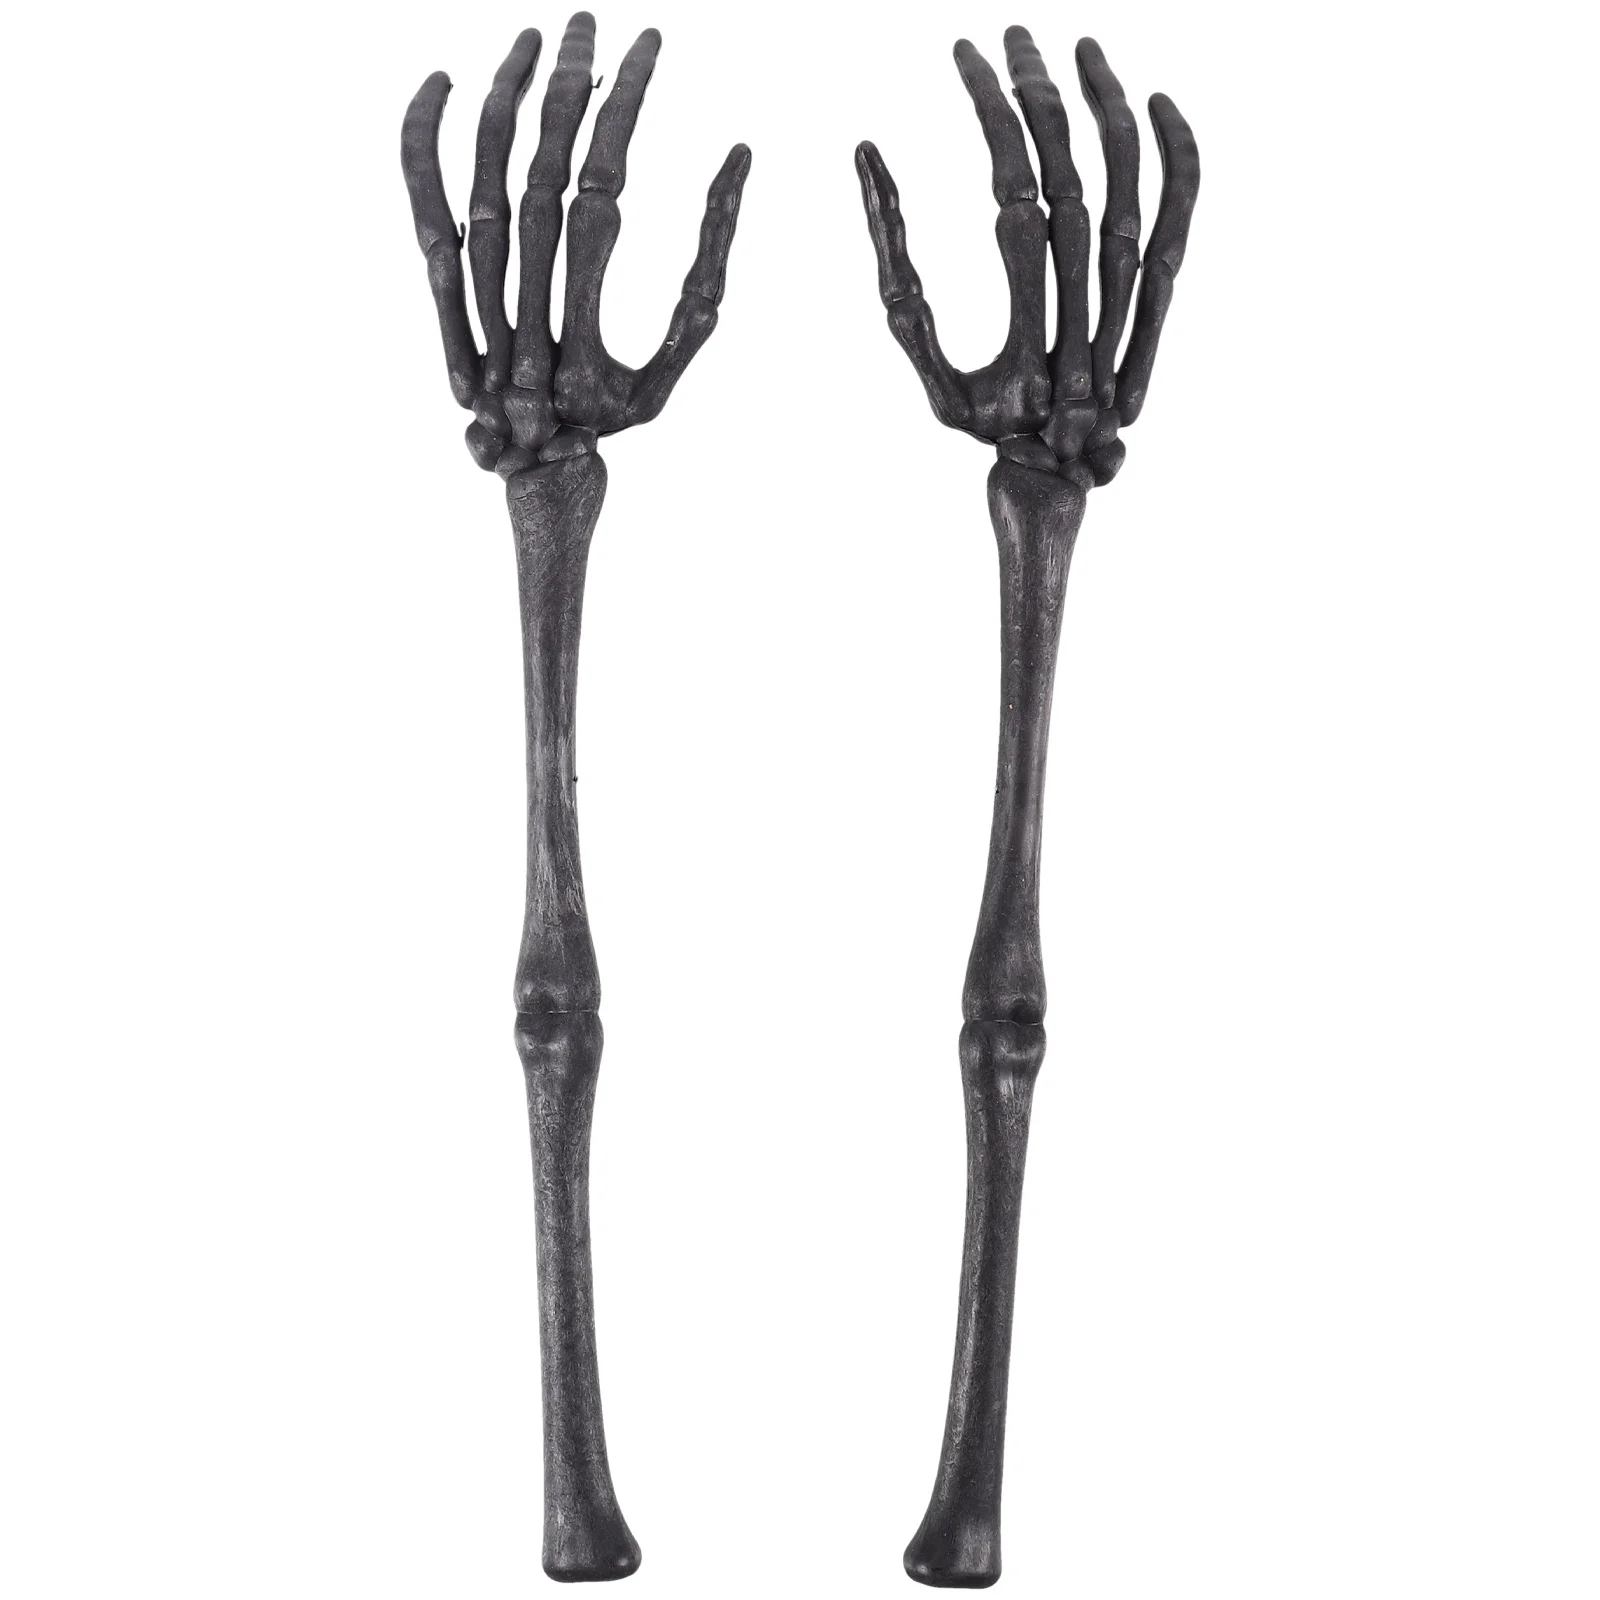 

Glowing Hands Stake Halloween Decoration Juneteenth Outdoor Decorations Realistic Props Scary Lawn Arm Stakes Party Sale